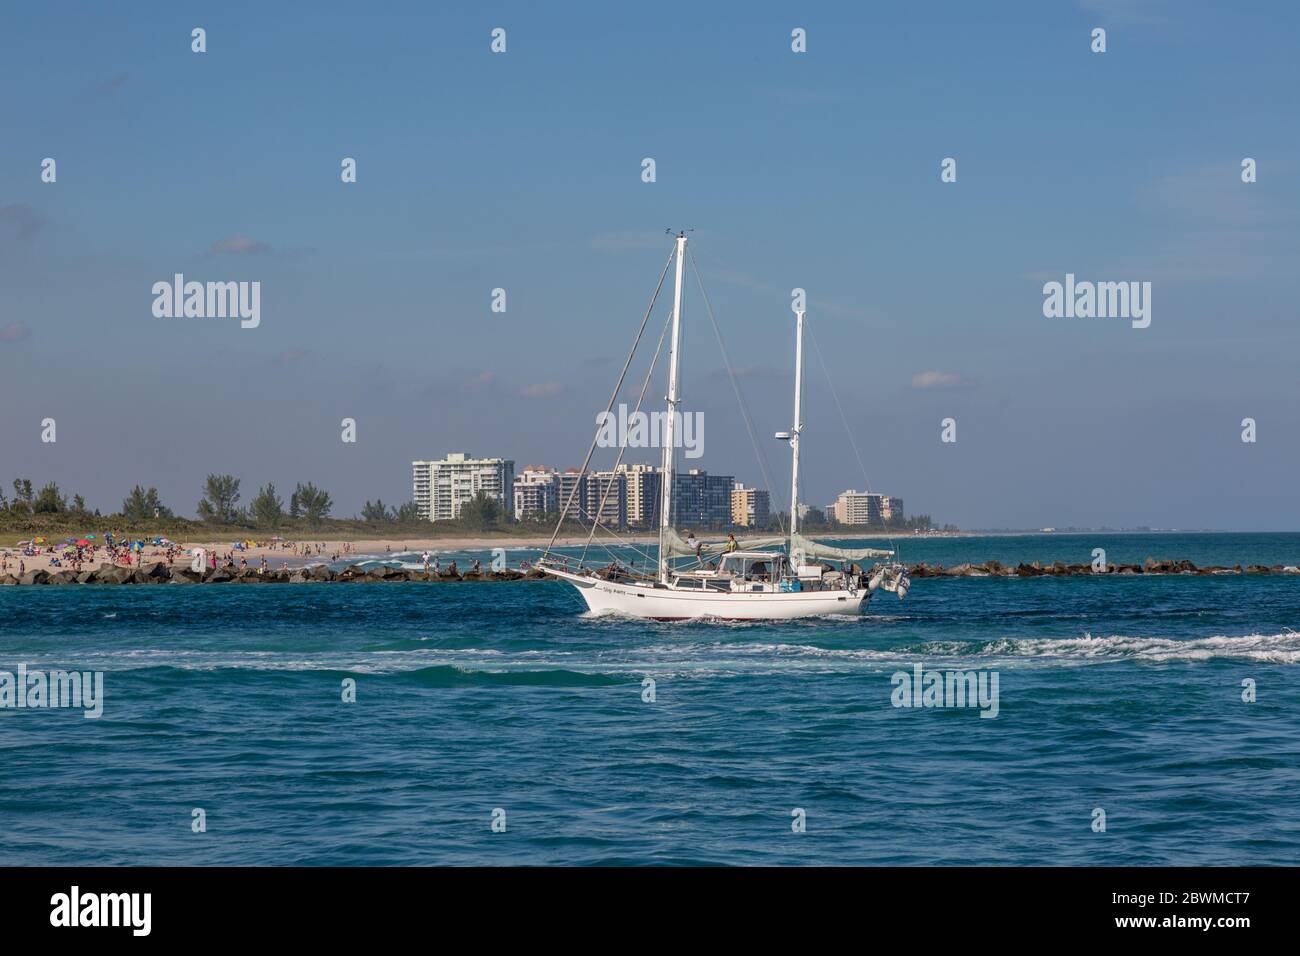 The sailboat 'Slip Away' passes the jetty and into the Fort Pierce Inlet in St. Lucie County, Florida, USA. Stock Photo